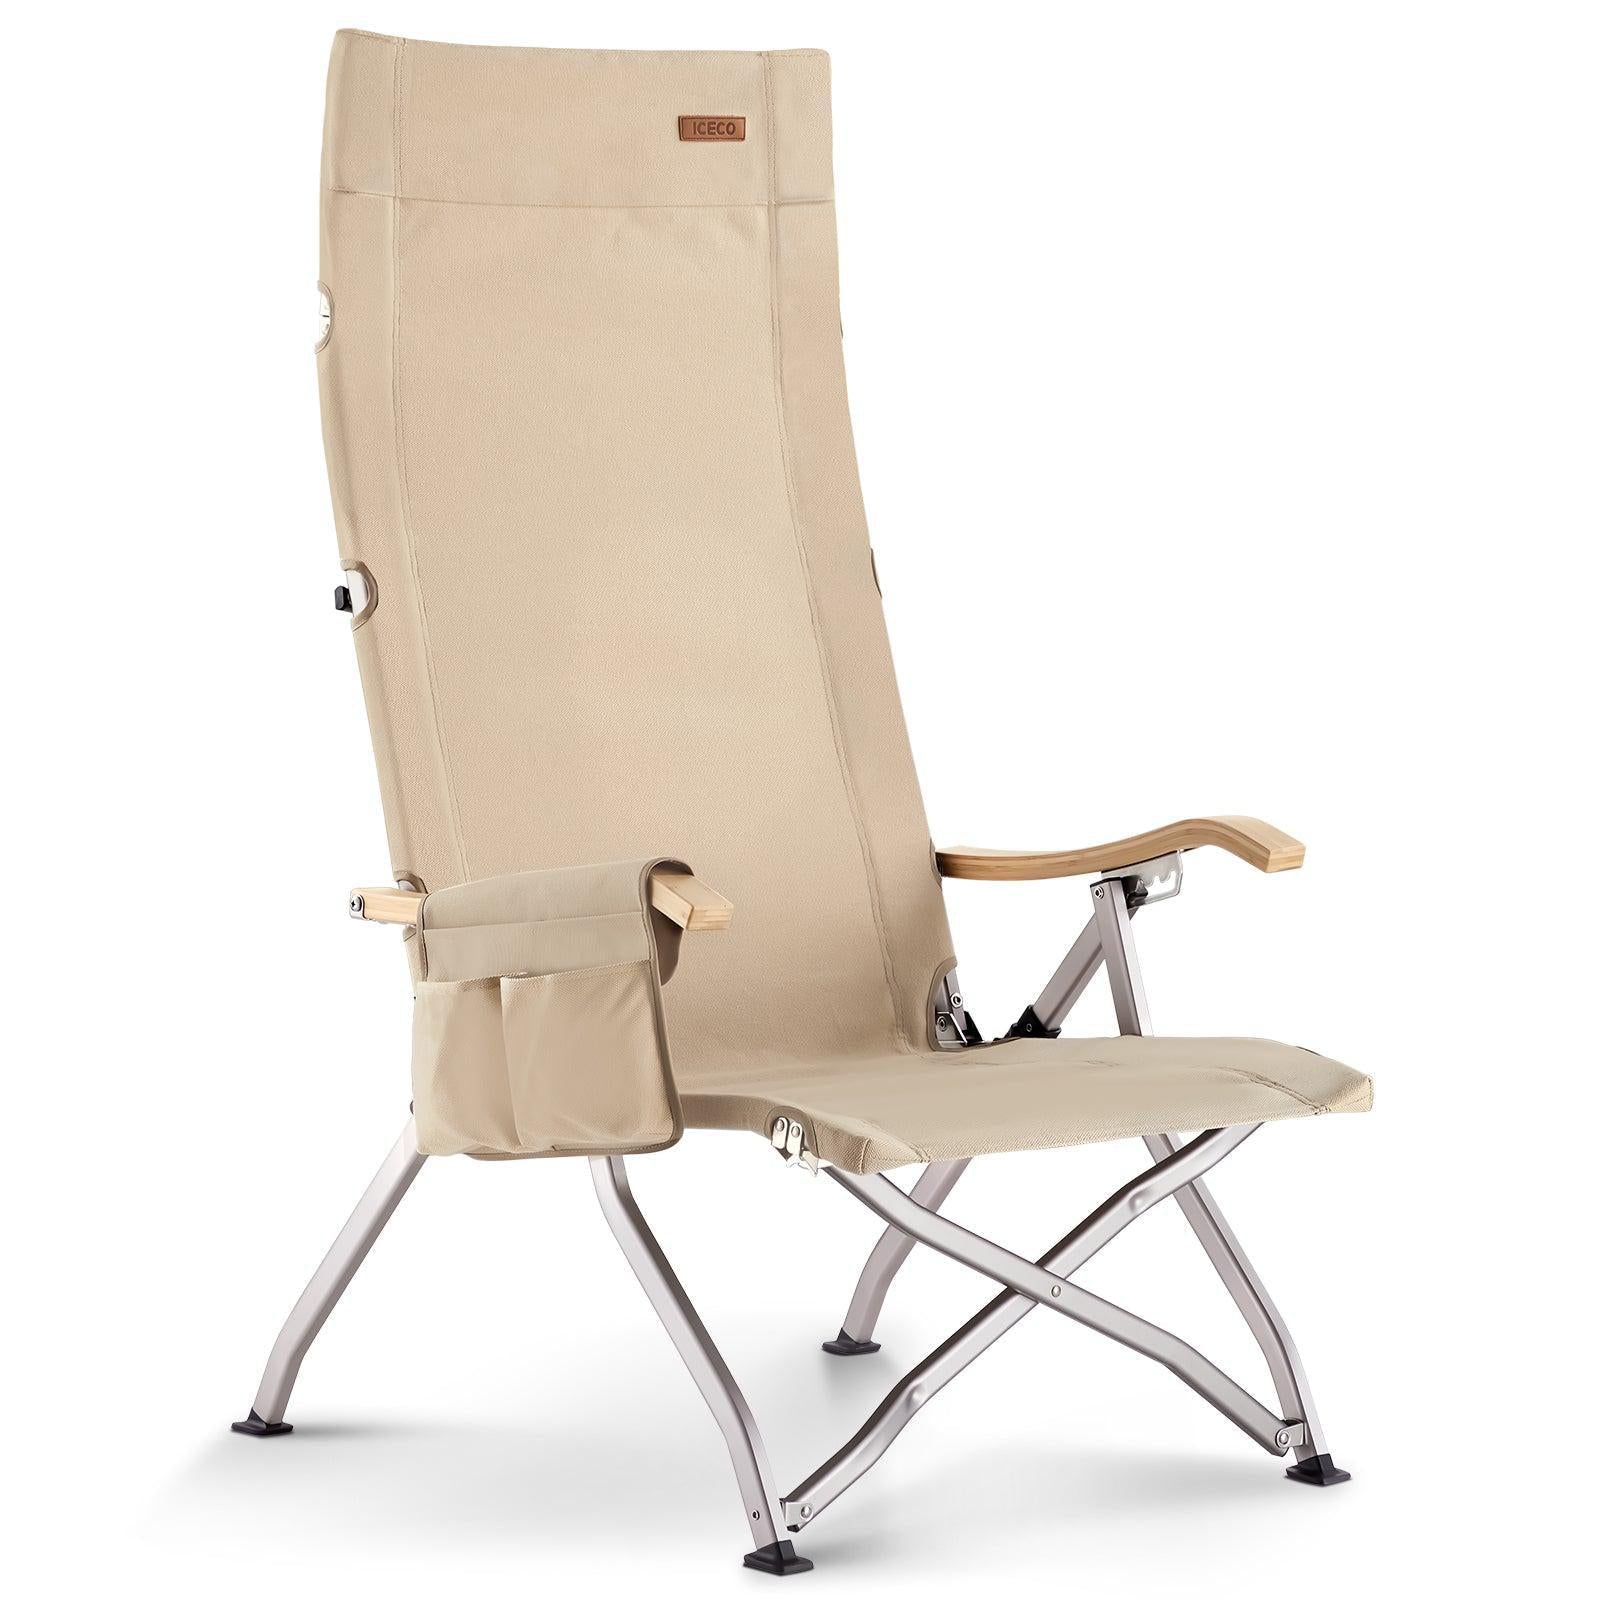 ICECO Ha1600 Adjustable Camping Chairs, High-Back Heavy Duty